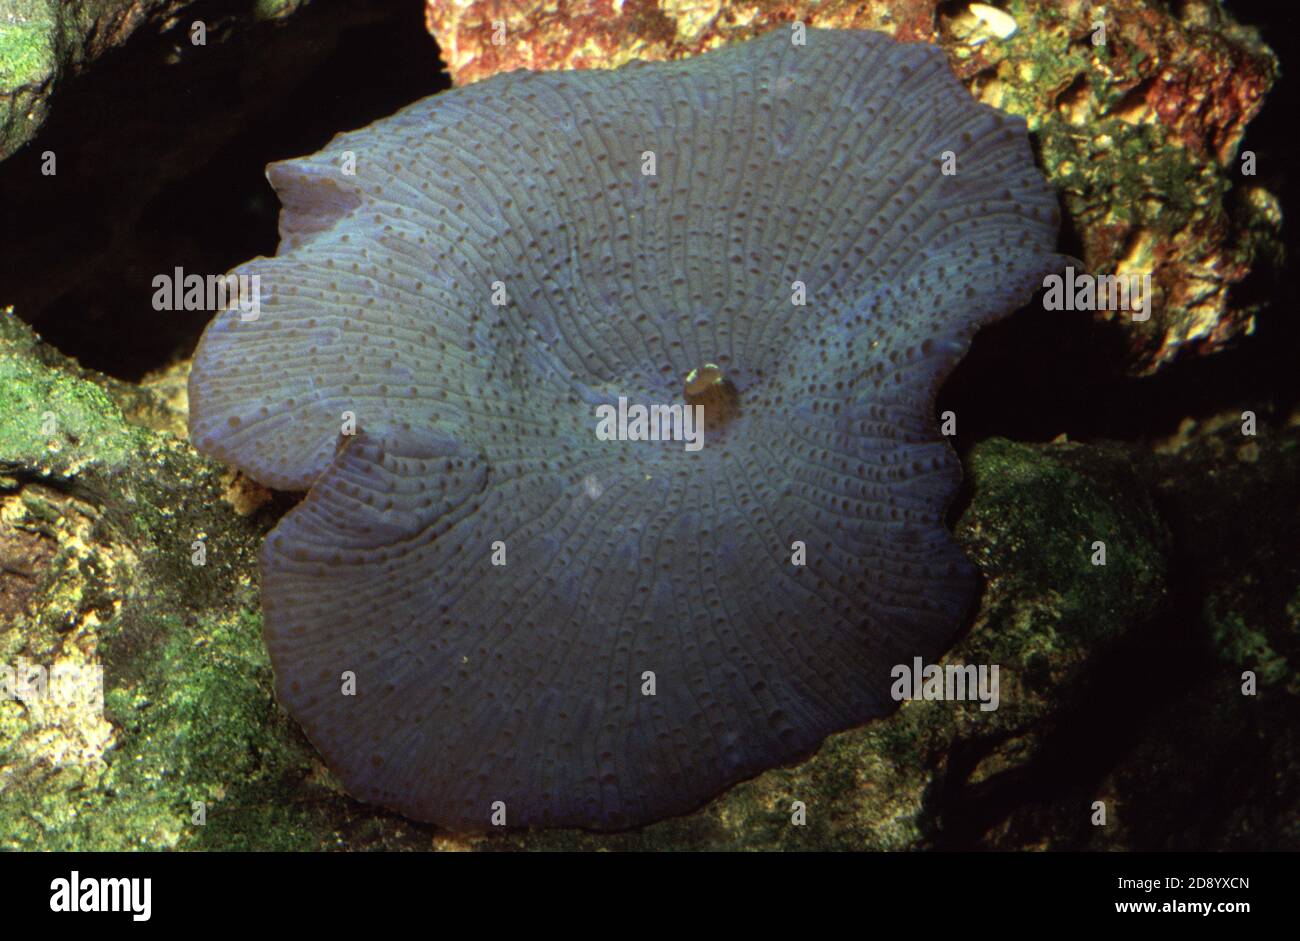 Discosoma is a genus of cnidarians in the order Corallimorpharia. Common names include mushroom anemone, disc anemone and elephant ear mushroom Stock Photo